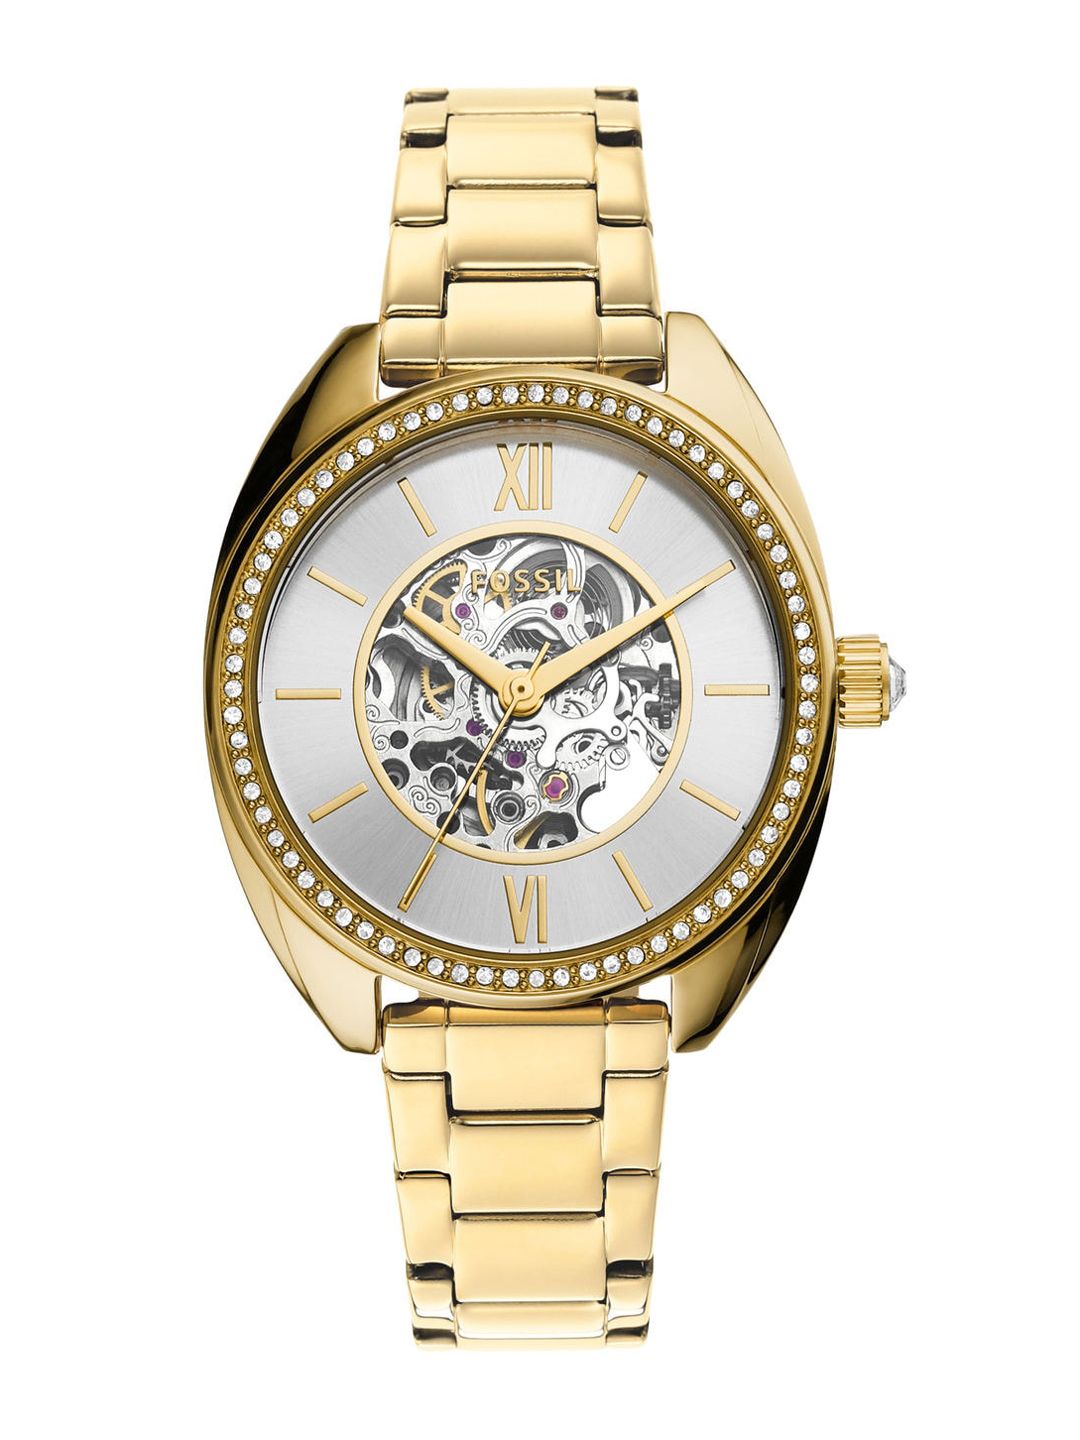 Fossil Women Silver Skeleton Dial & Gold Toned Bracelet Style Straps Analogue Watch BQ3729 Price in India